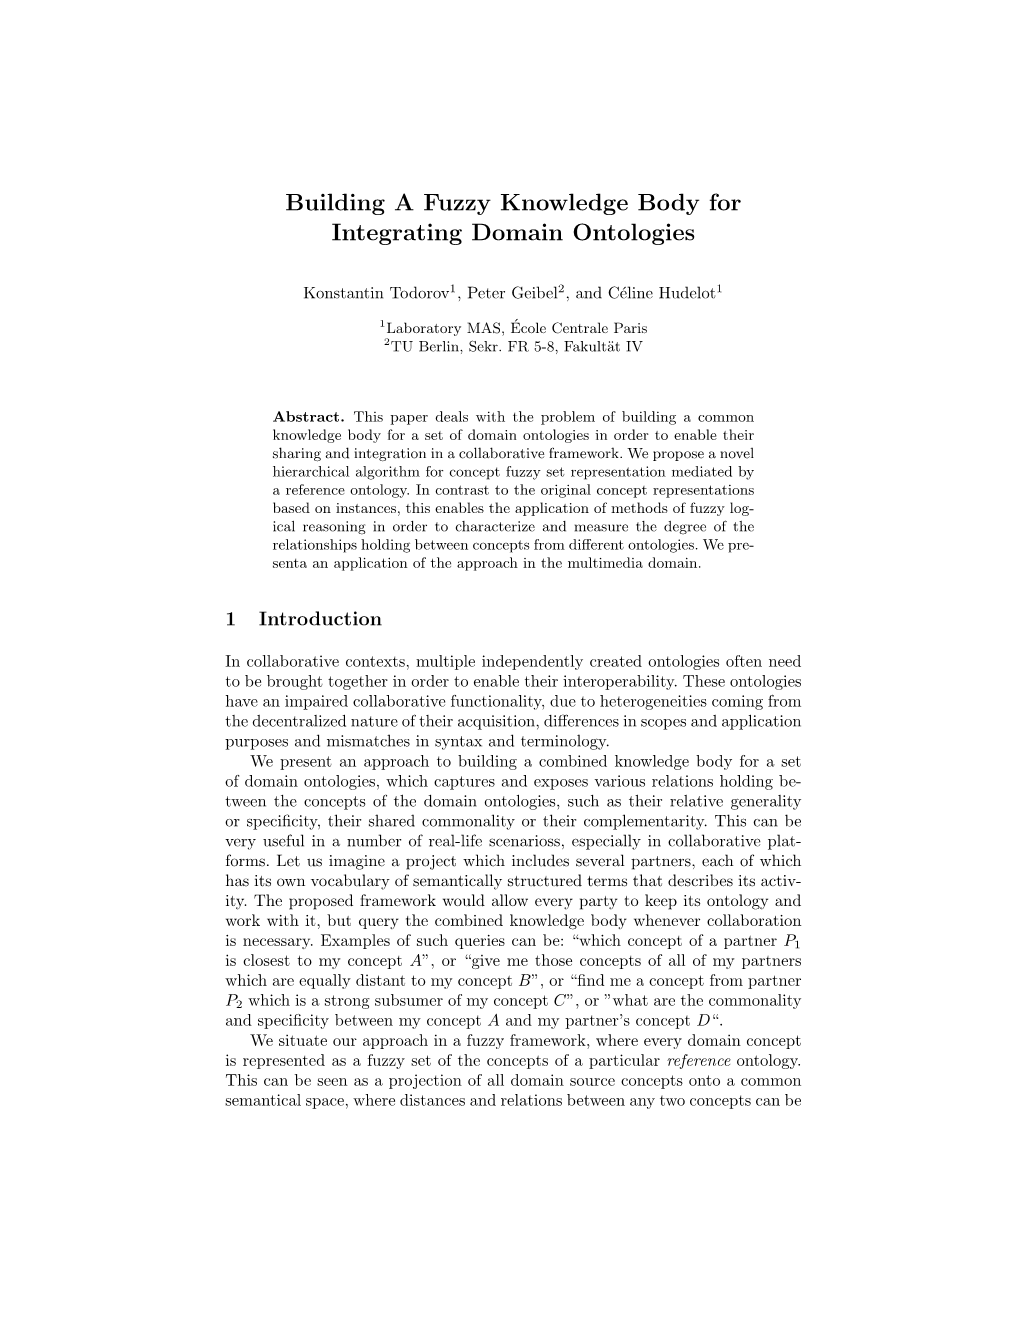 Building a Fuzzy Knowledge Body for Integrating Domain Ontologies